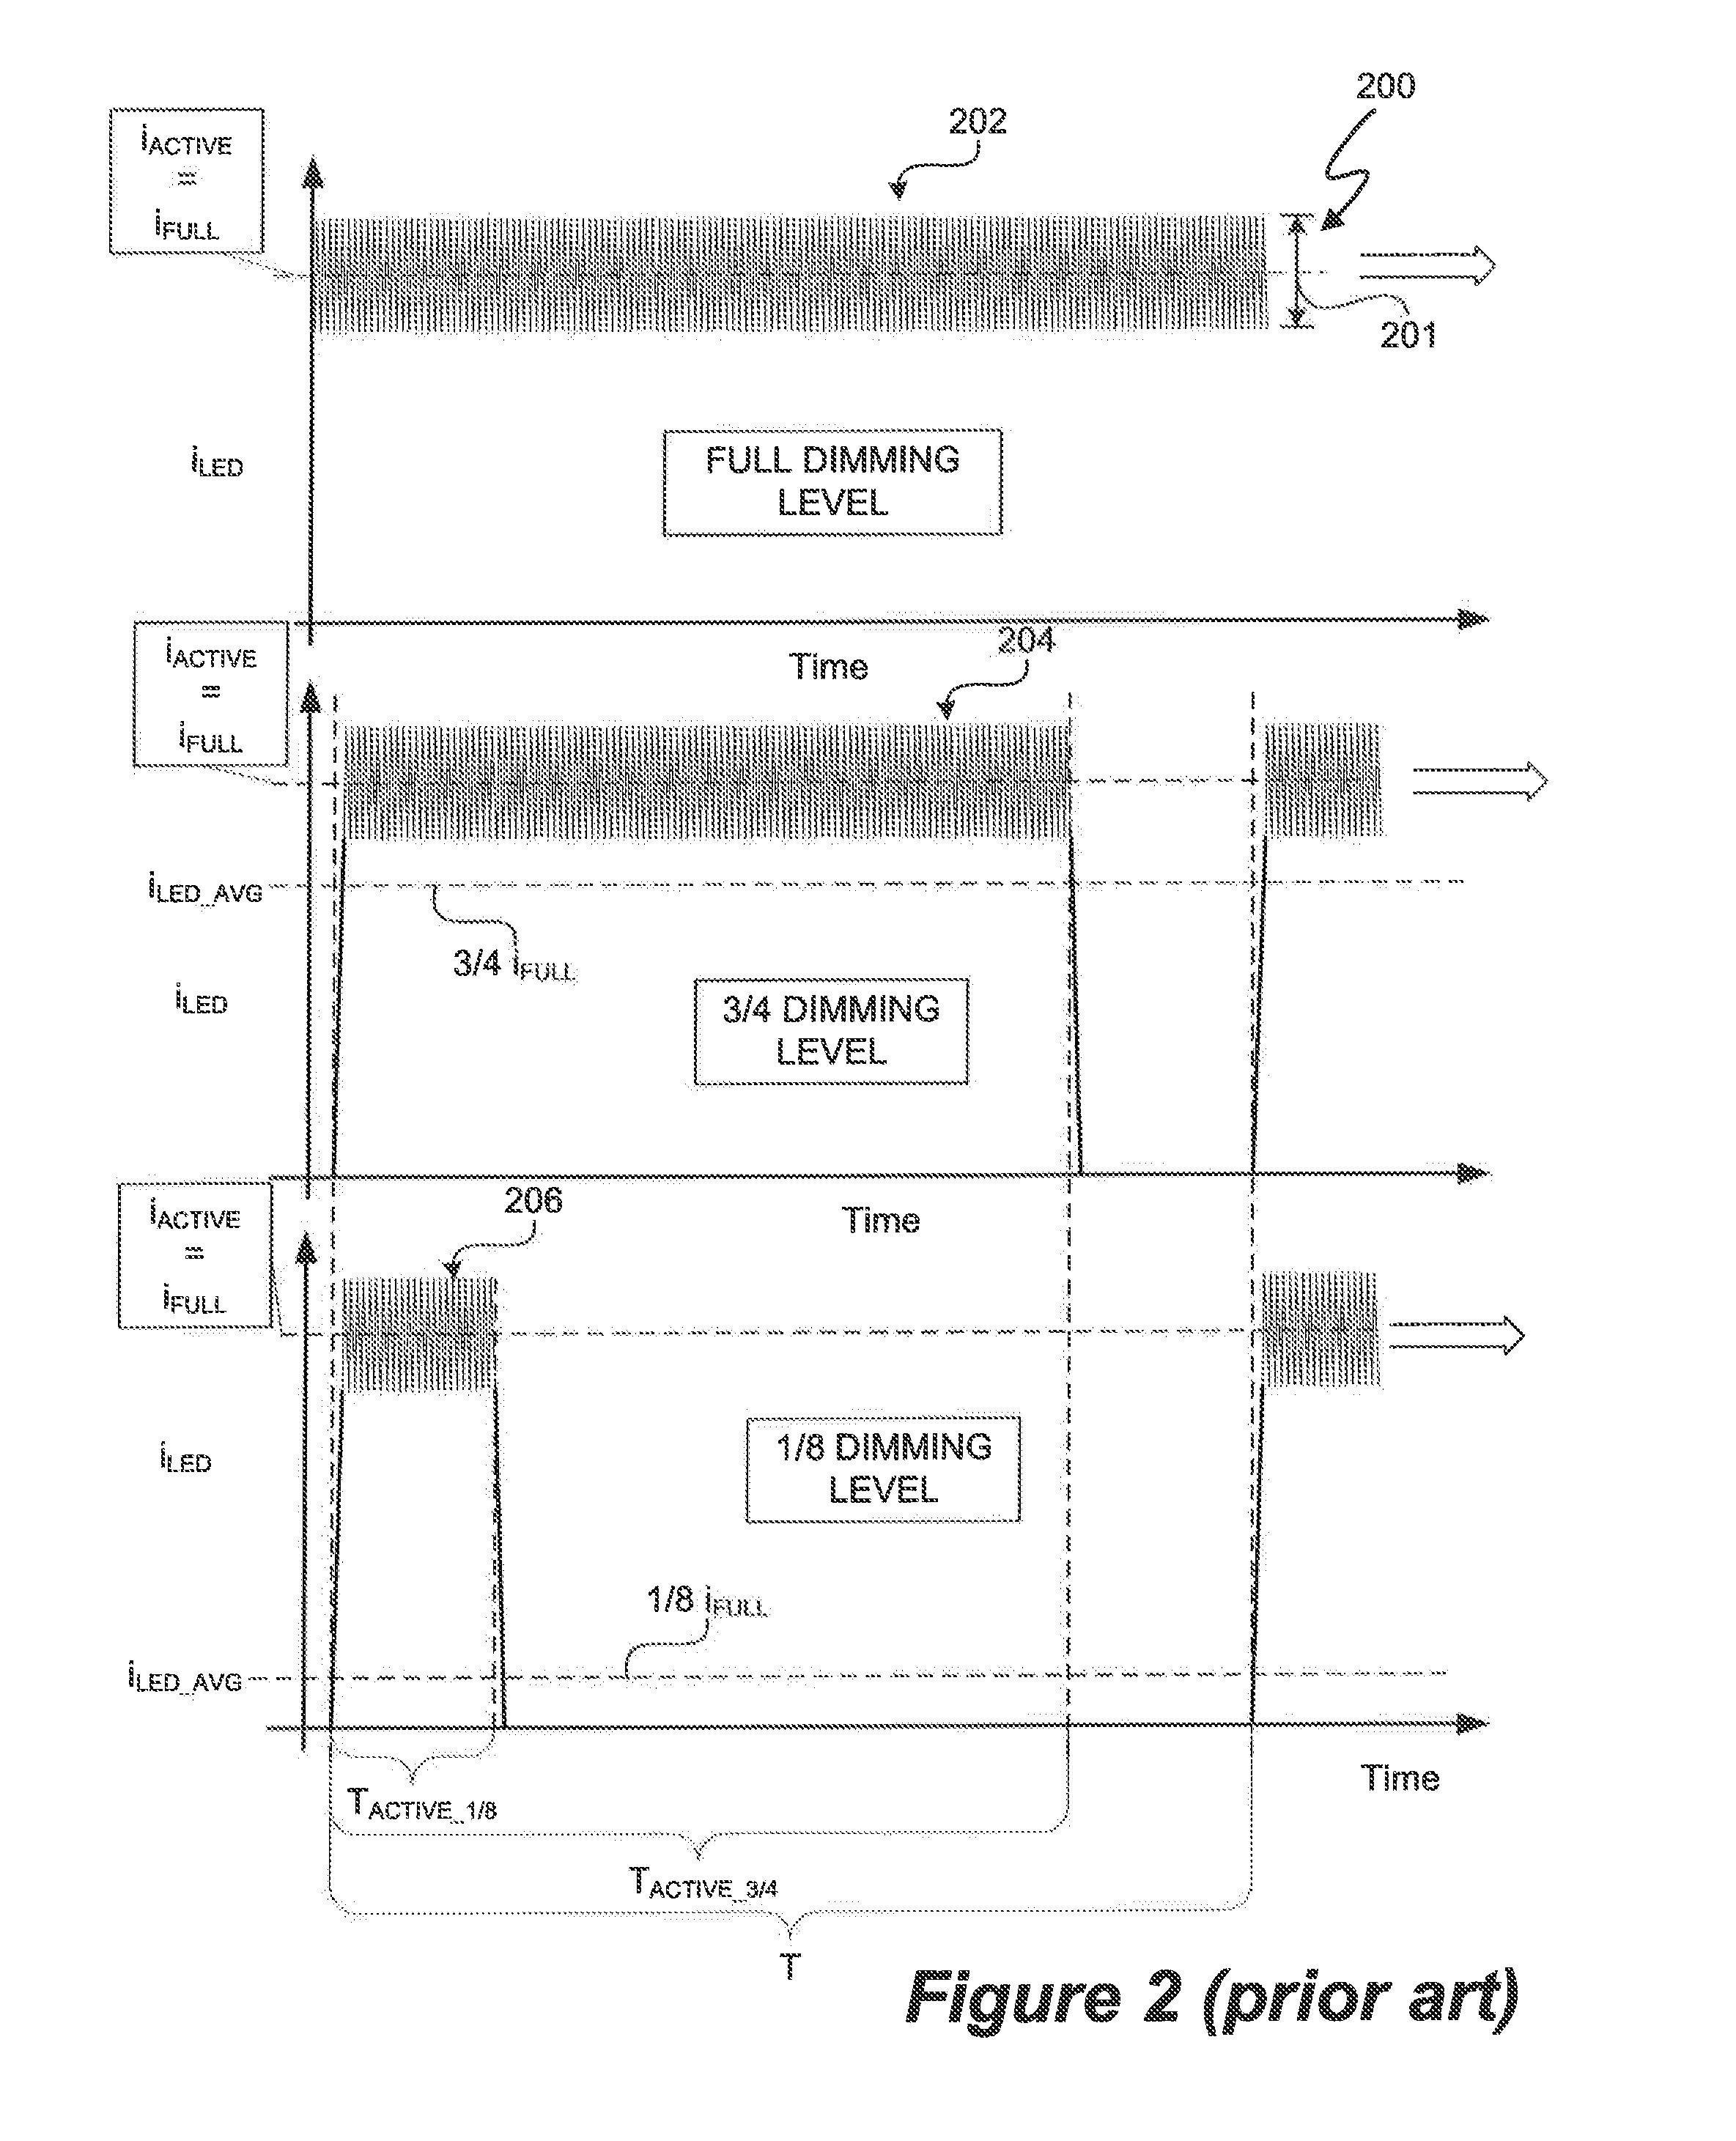 LED Lighting System with Accurate Current Control